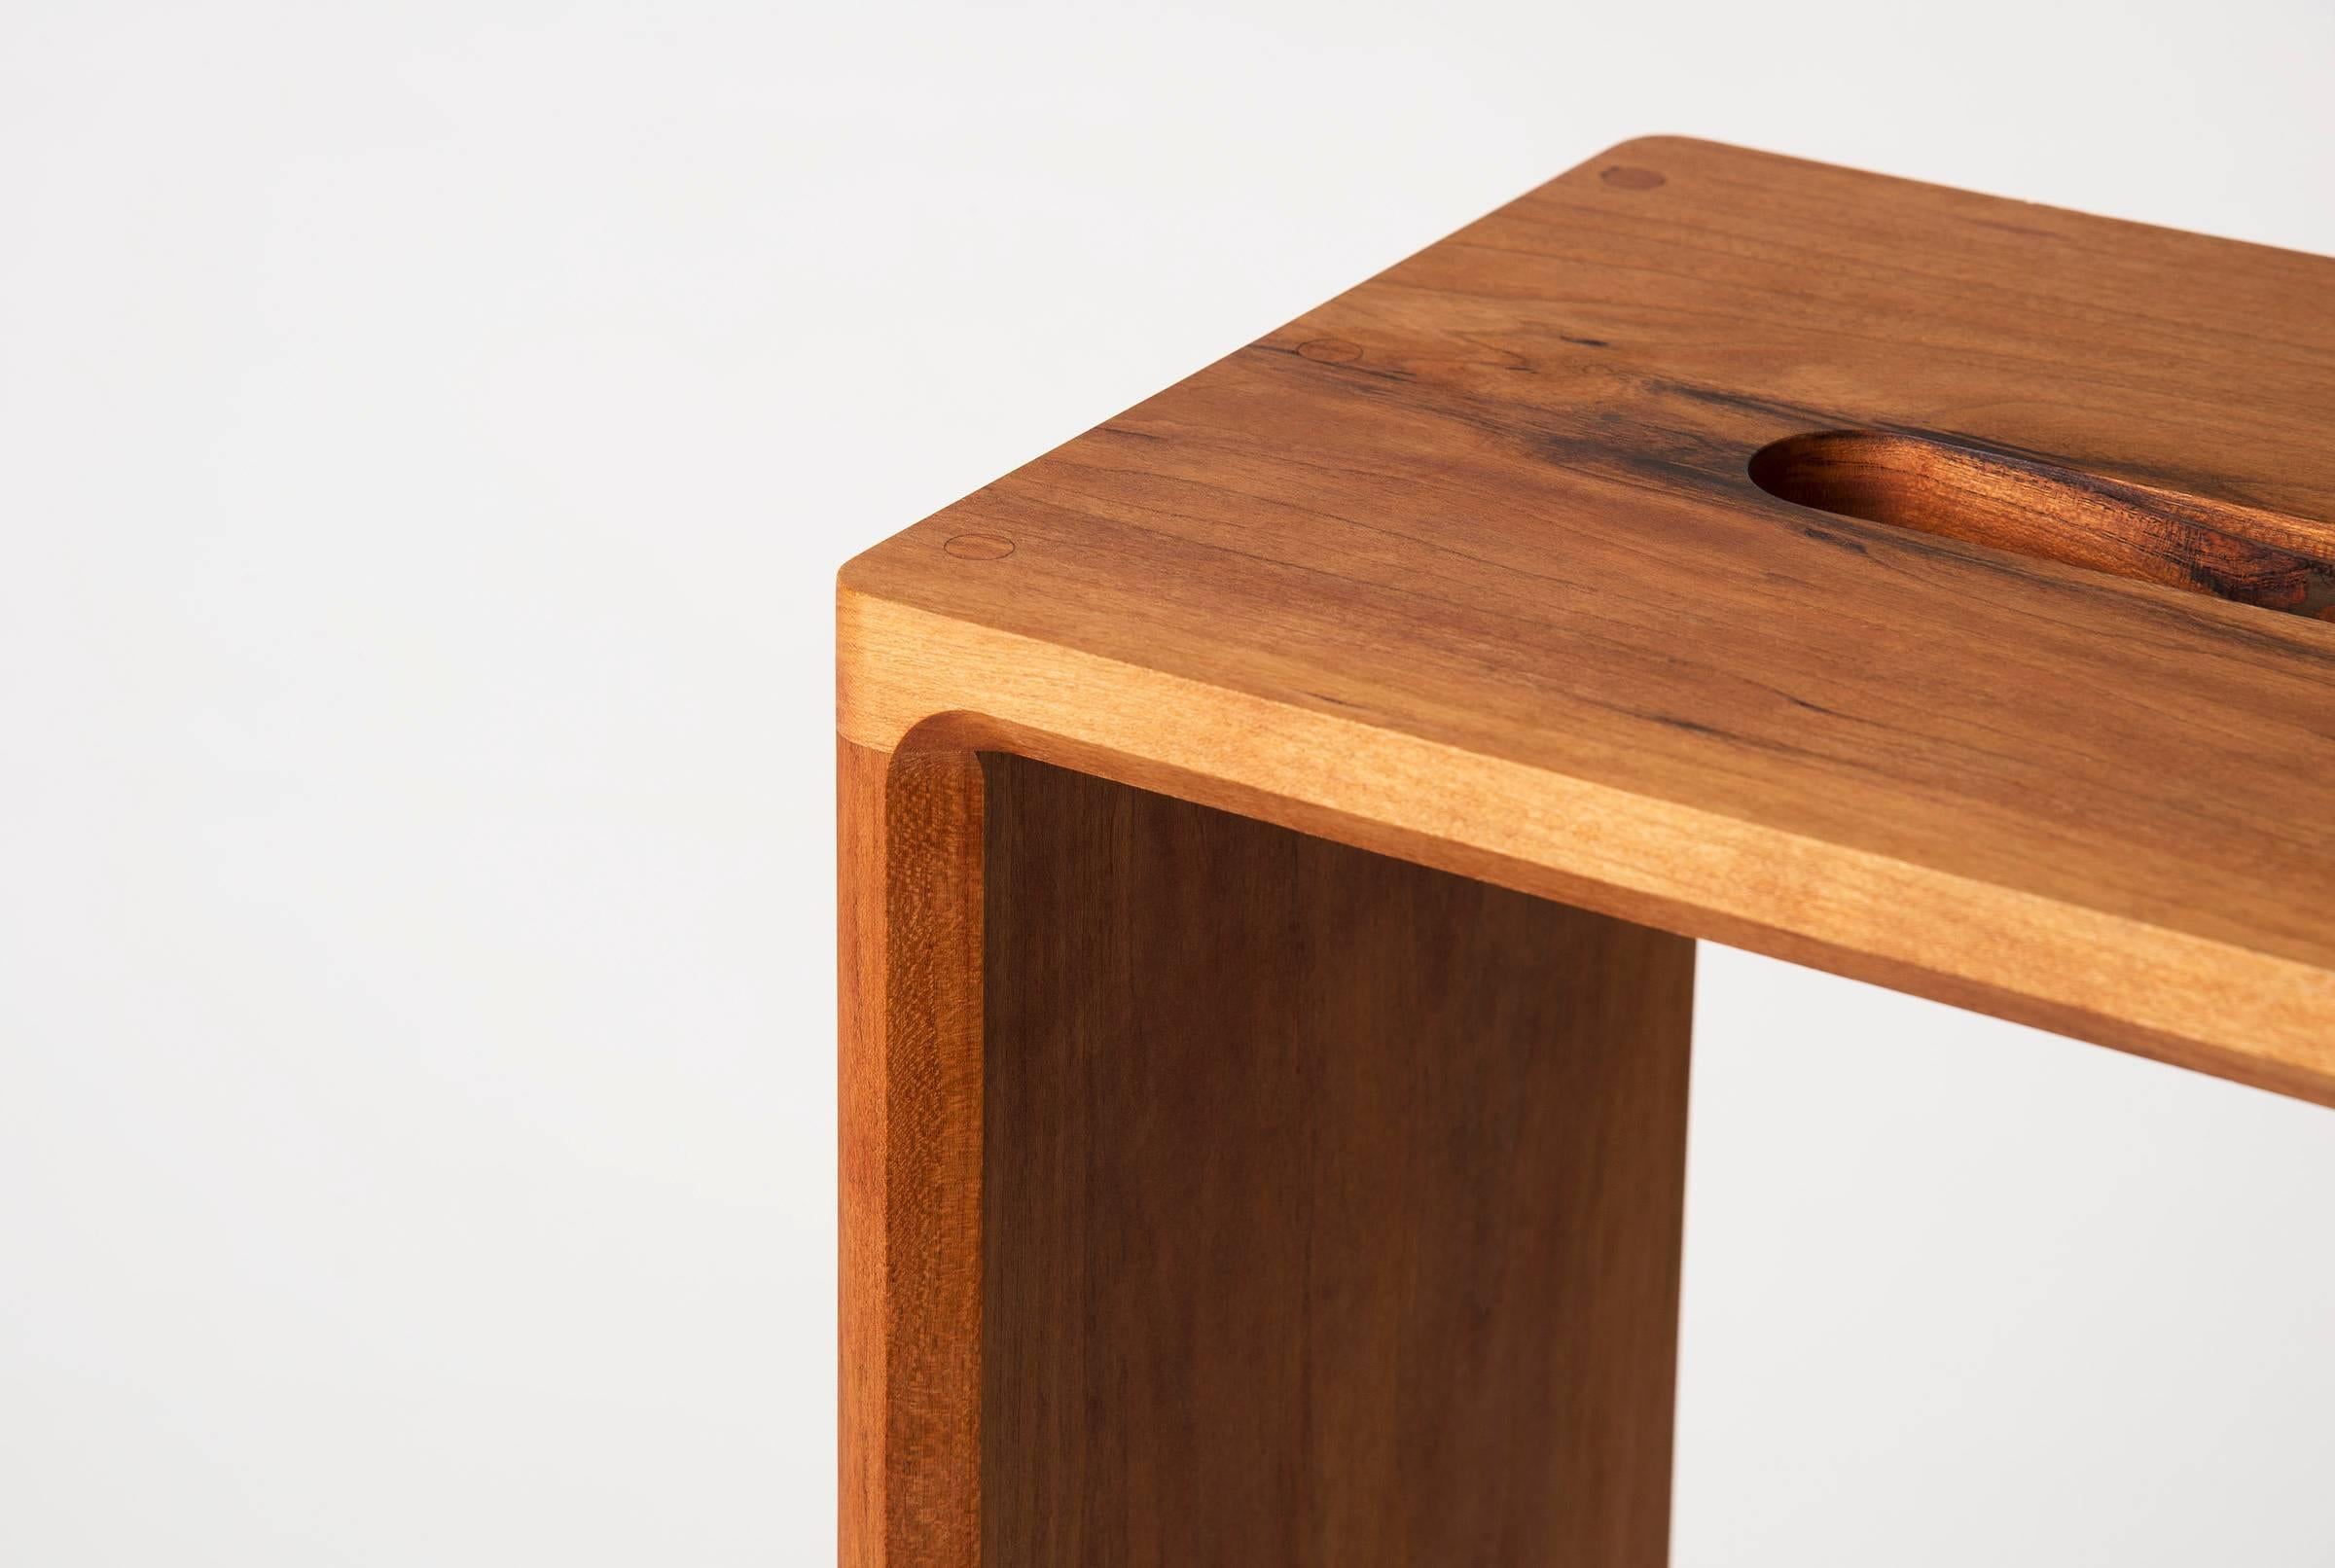 Chamfered Contemporary Prop Stool Handmade Solid Cherry Wood Seat from CBR Studio For Sale